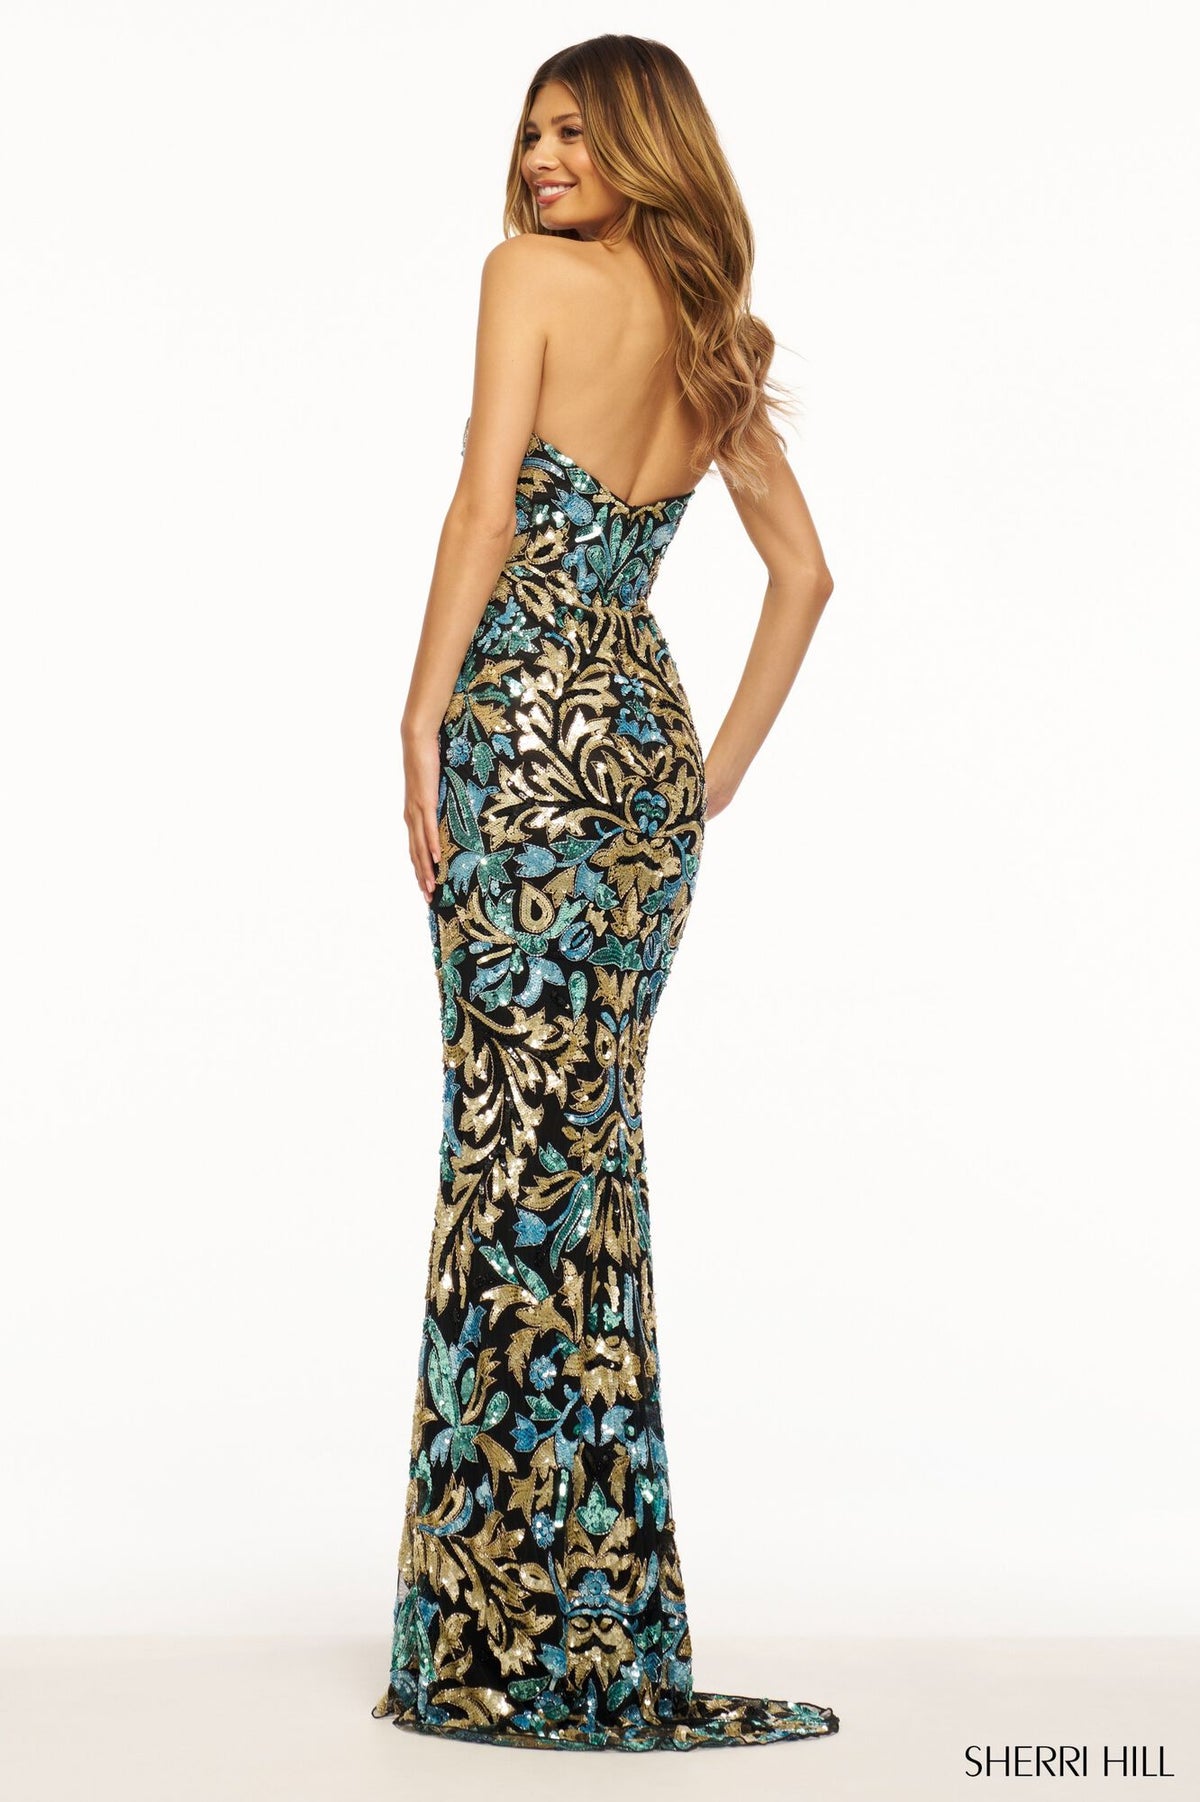 SHERRI HILL 56080 - A stunning strapless beaded gown with a sweetheart neckline, perfect for a glamorous and romantic look at prom or evening events.  Back view of the dress.